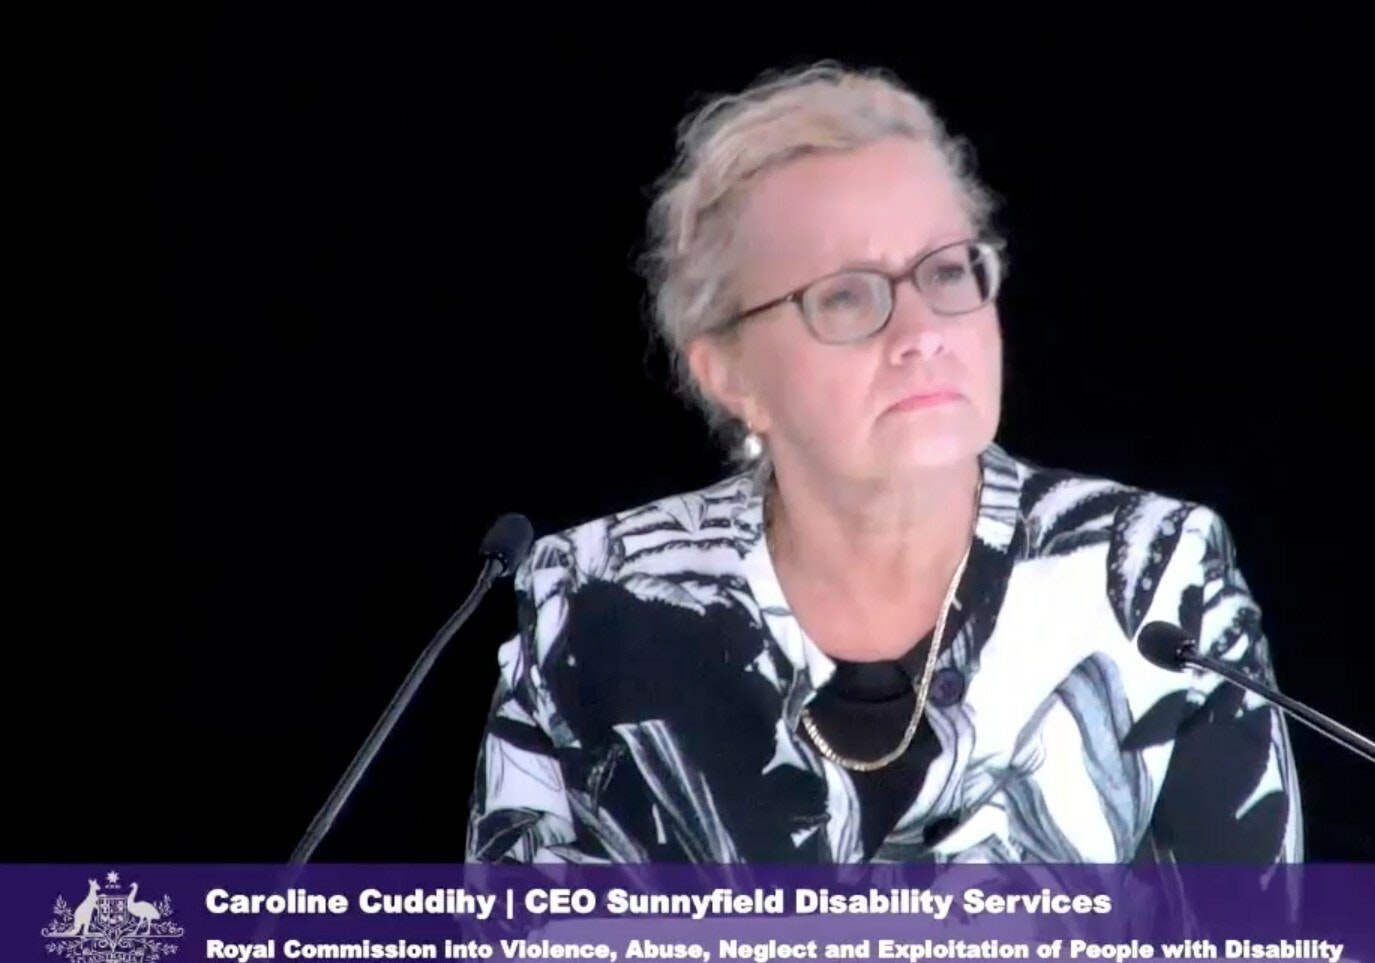 <p> Sunnyfield Disability Services CEO Caroline Cuddihy fronted the disability royal commission over three days last week. [Source: Disability Royal Commission]</p>
